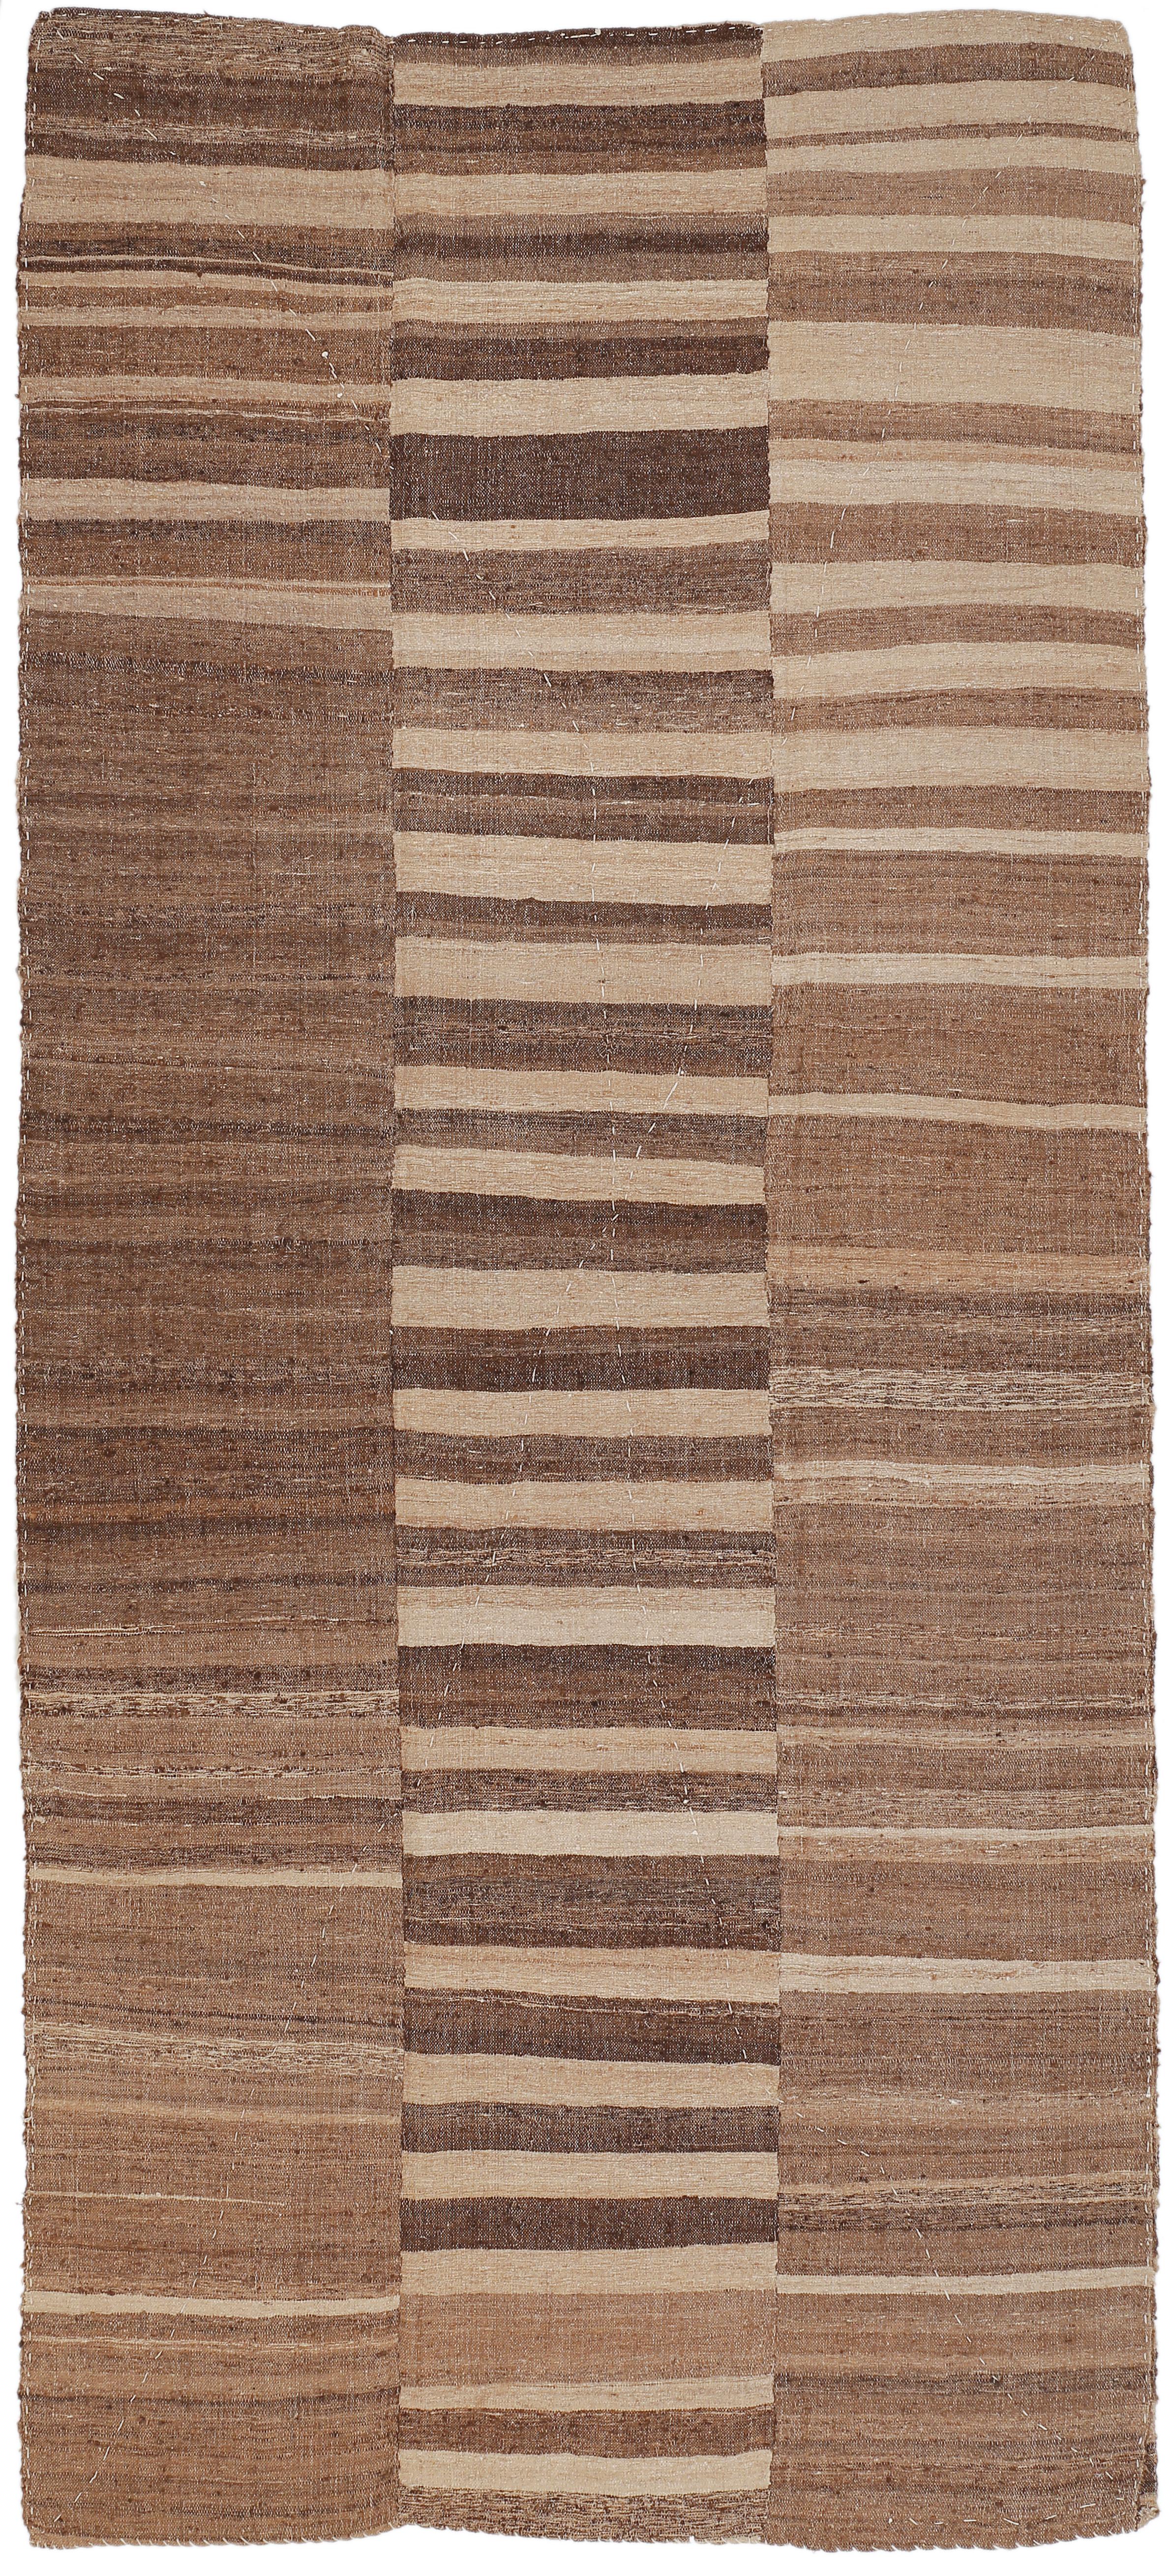 Double-sided covers of this type are called lahaf, and are typically woven with natural, undyed wool on three narrow panels, with each side displaying an asymmetric combination of horizontal stripes alternated to open fields. The two sides are then